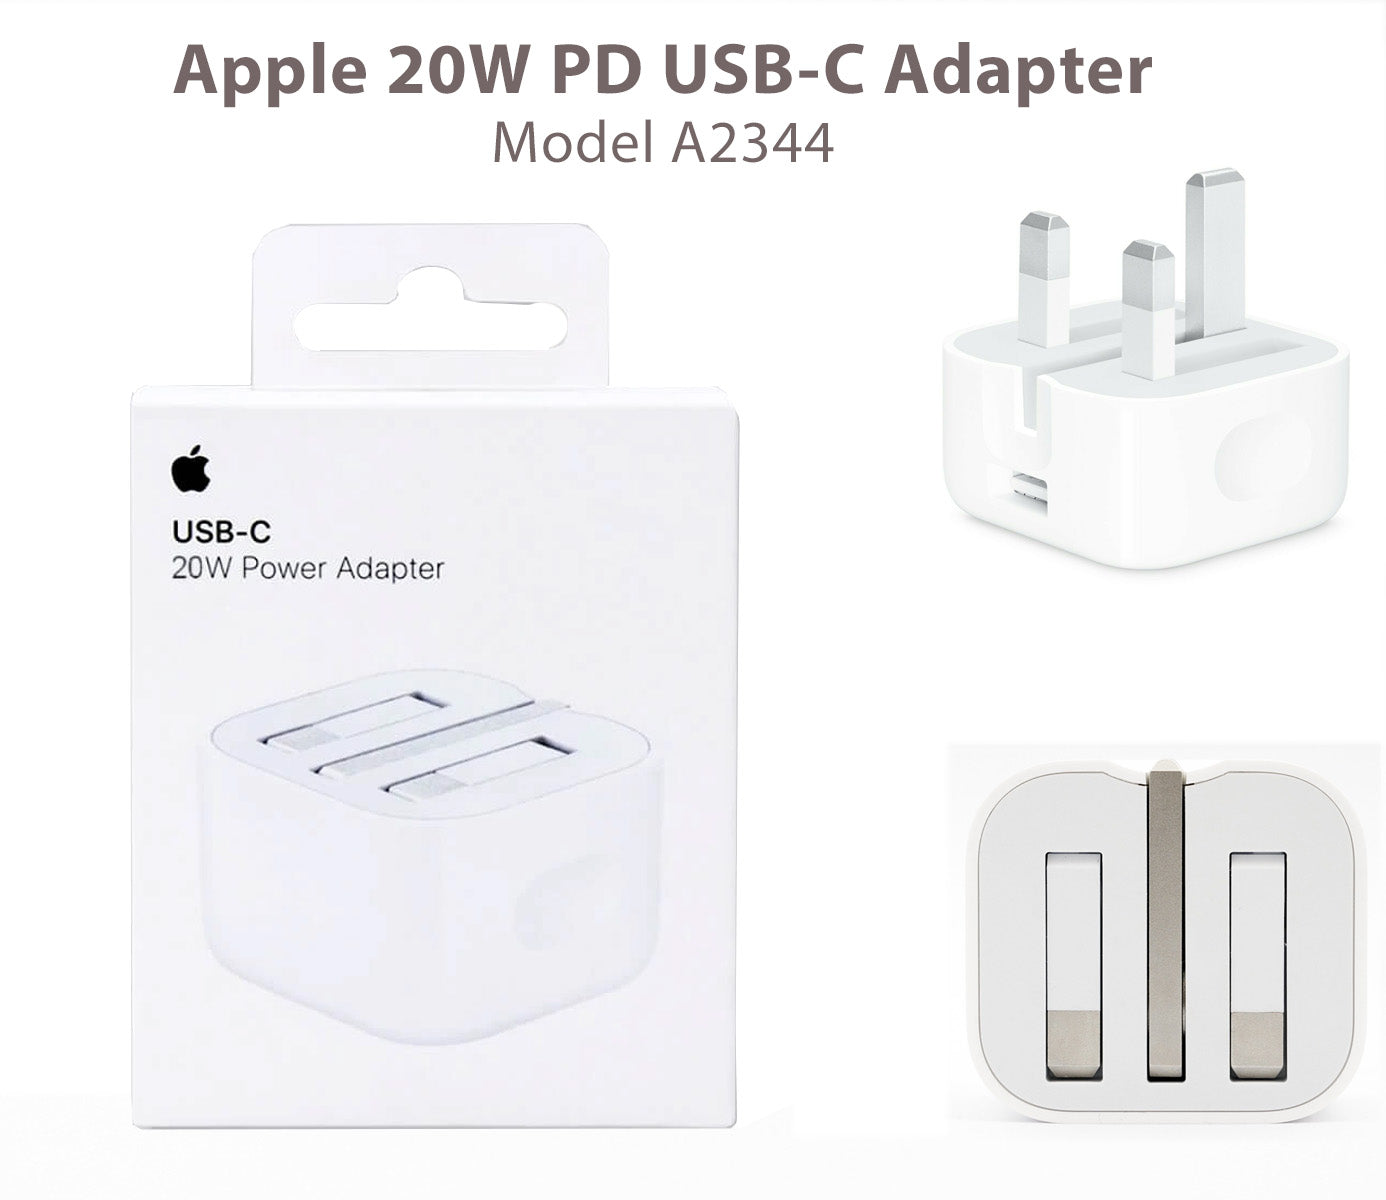 Pack of 2 :20w Original 3 Pin Adapter with 20w Lightning Cable